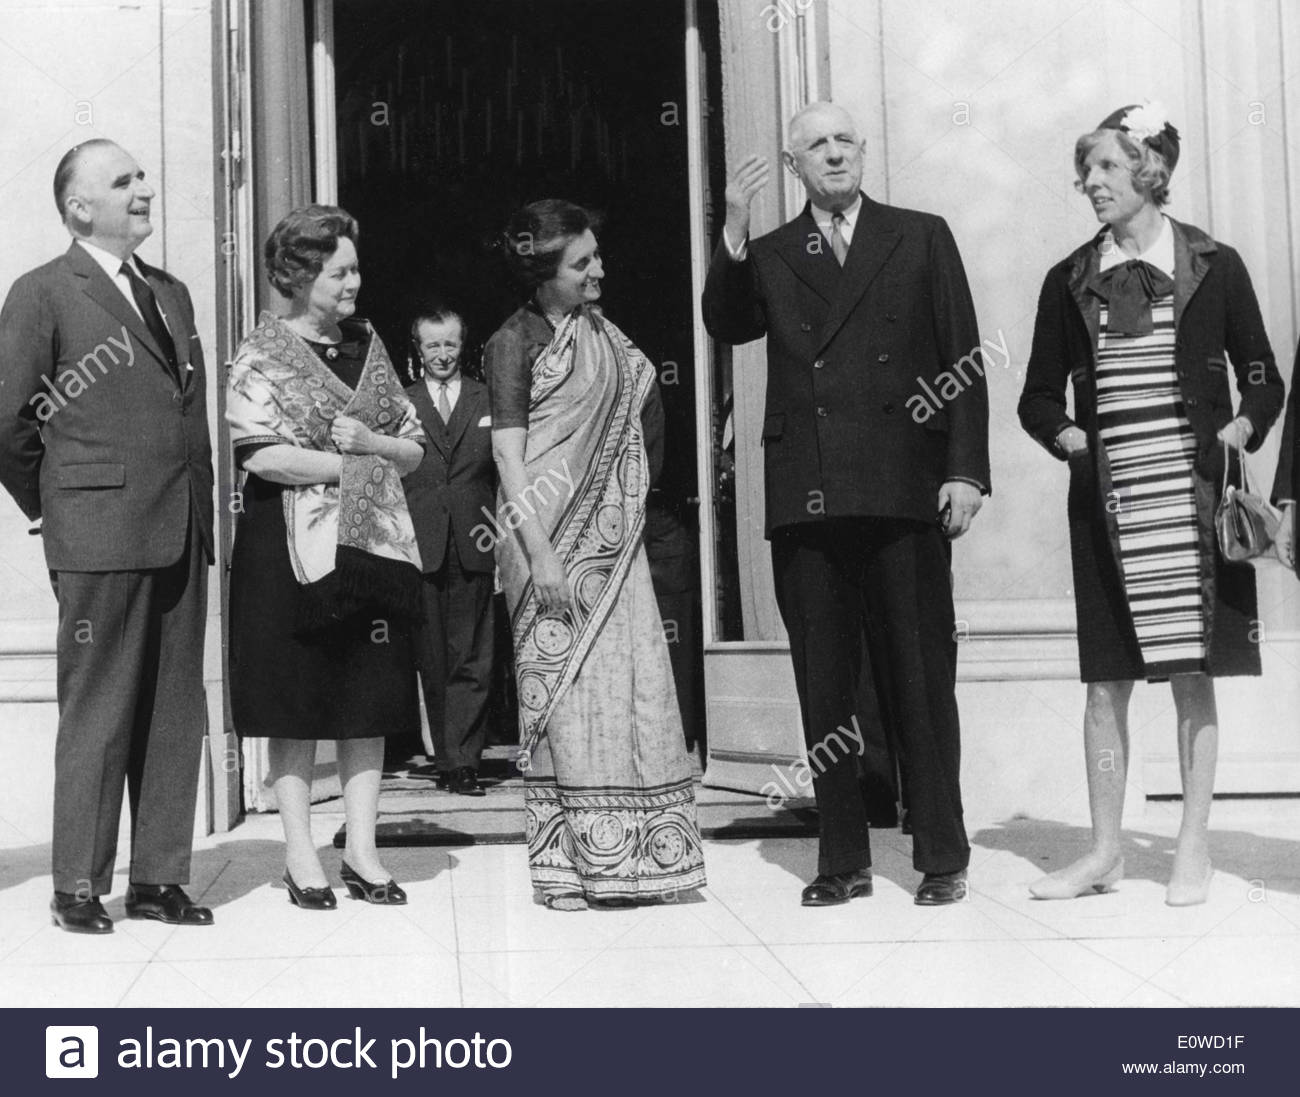 president-of-france-charles-de-gaulle-and-pms-india-indira-gandhi-E0WD1F.jpg